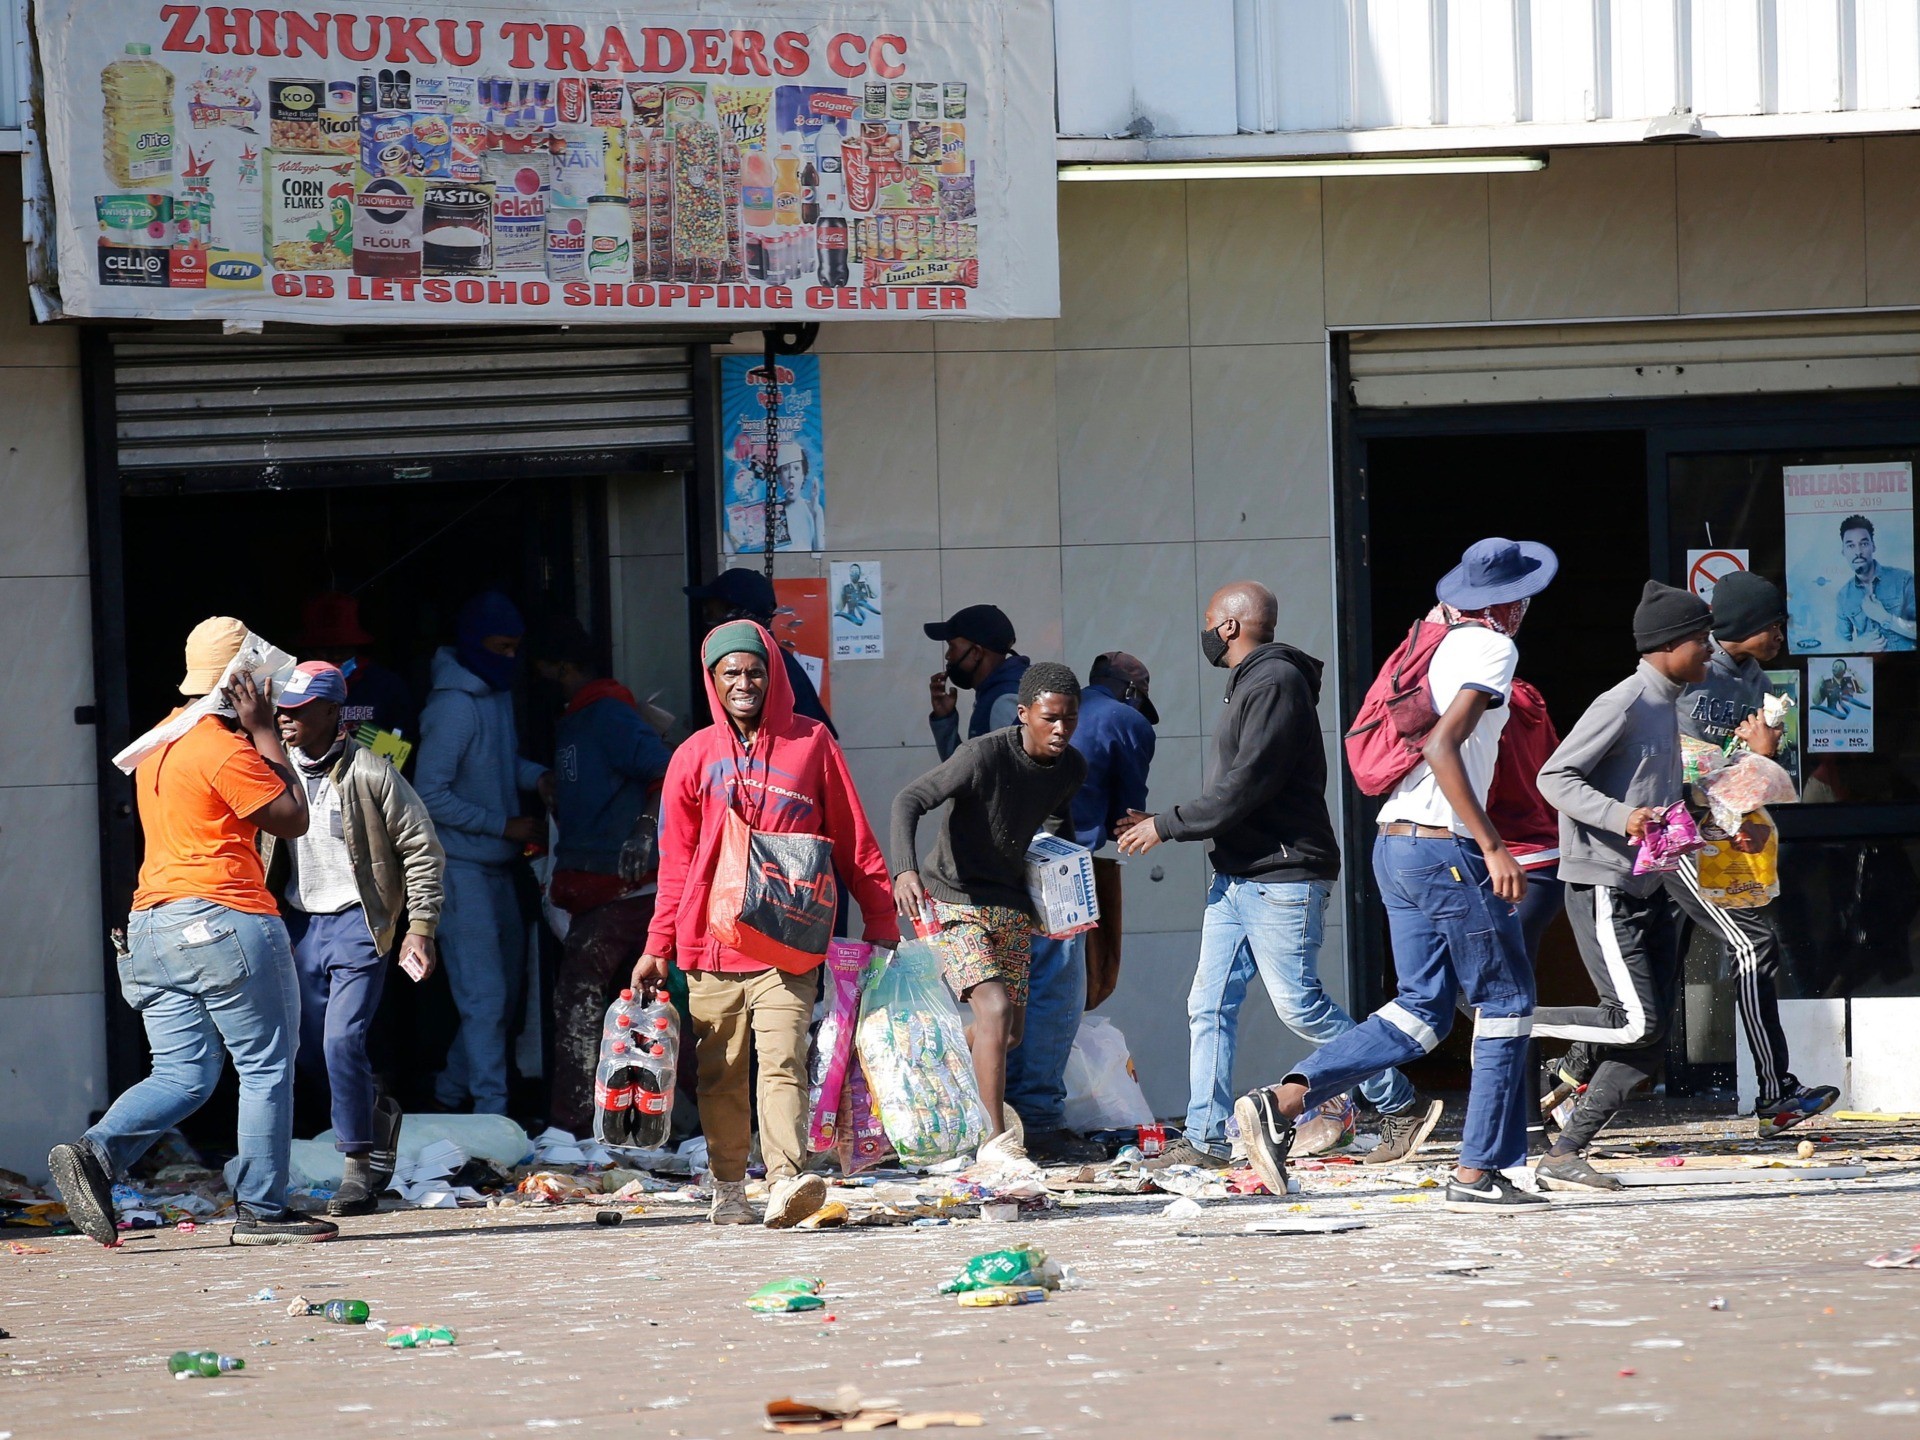 People carry goods as they loot and vandalise the Lotsoho Mall in Katlehong township, East of Johannesburg, on July 12, 2021. Several shops are damaged and cars burnt in Johannesburg, following a night of violence. Police are on the scene trying to control further protests. It is unclear if this is linked to sporadic protests following the incarceration of former president Jacob Zuma. (Photo by Phill Magakoe / AFP) (Photo by PHILL MAGAKOE/AFP via Getty Images)